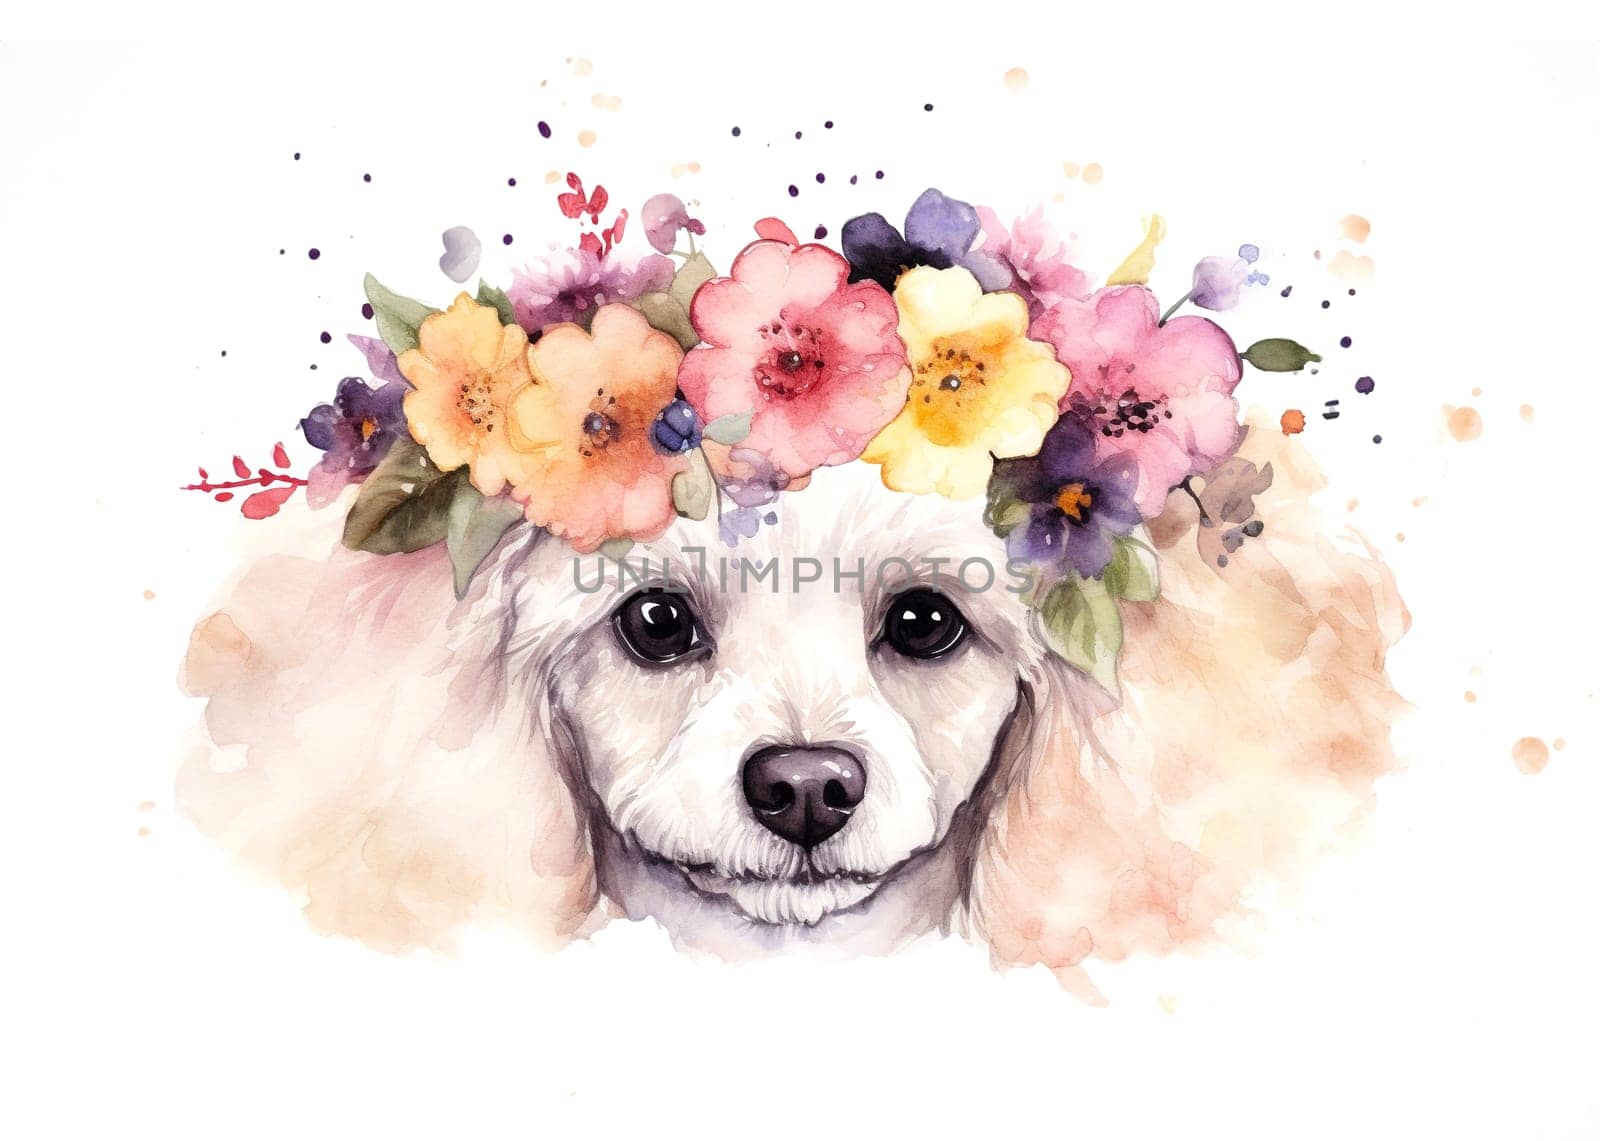 Watercolor illustration of cute poodle flower wreath on the head and splashes of watercolor paint by GekaSkr